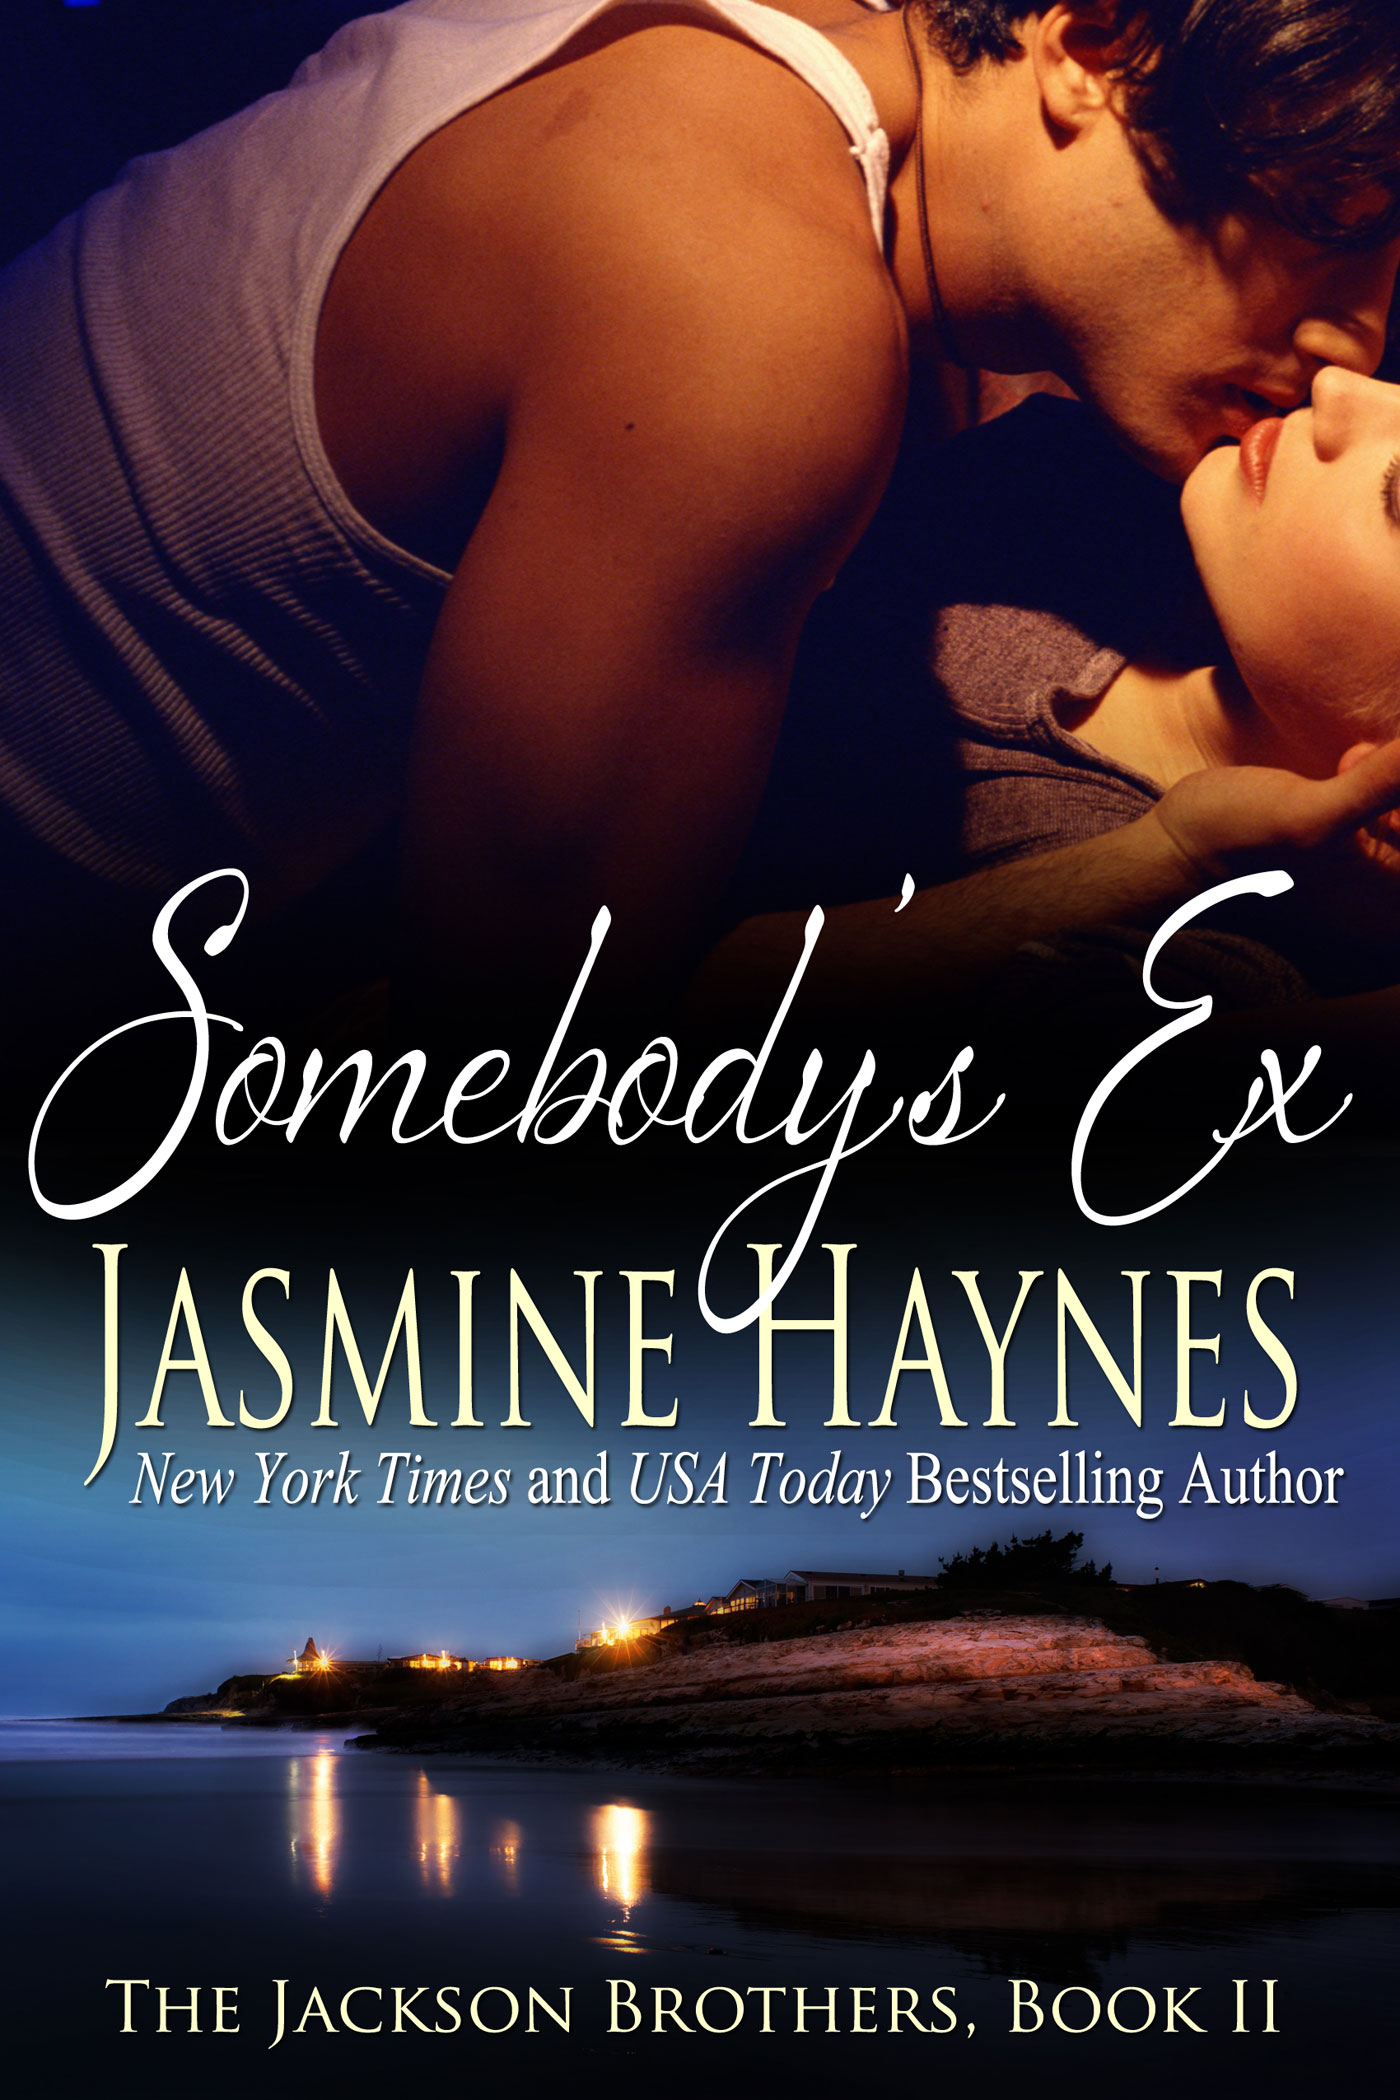 Cover of Somebody's Ex by Jasmine Haynes, New York Times and USA Today Bestselling Author - The Jackson Brothers, Book II